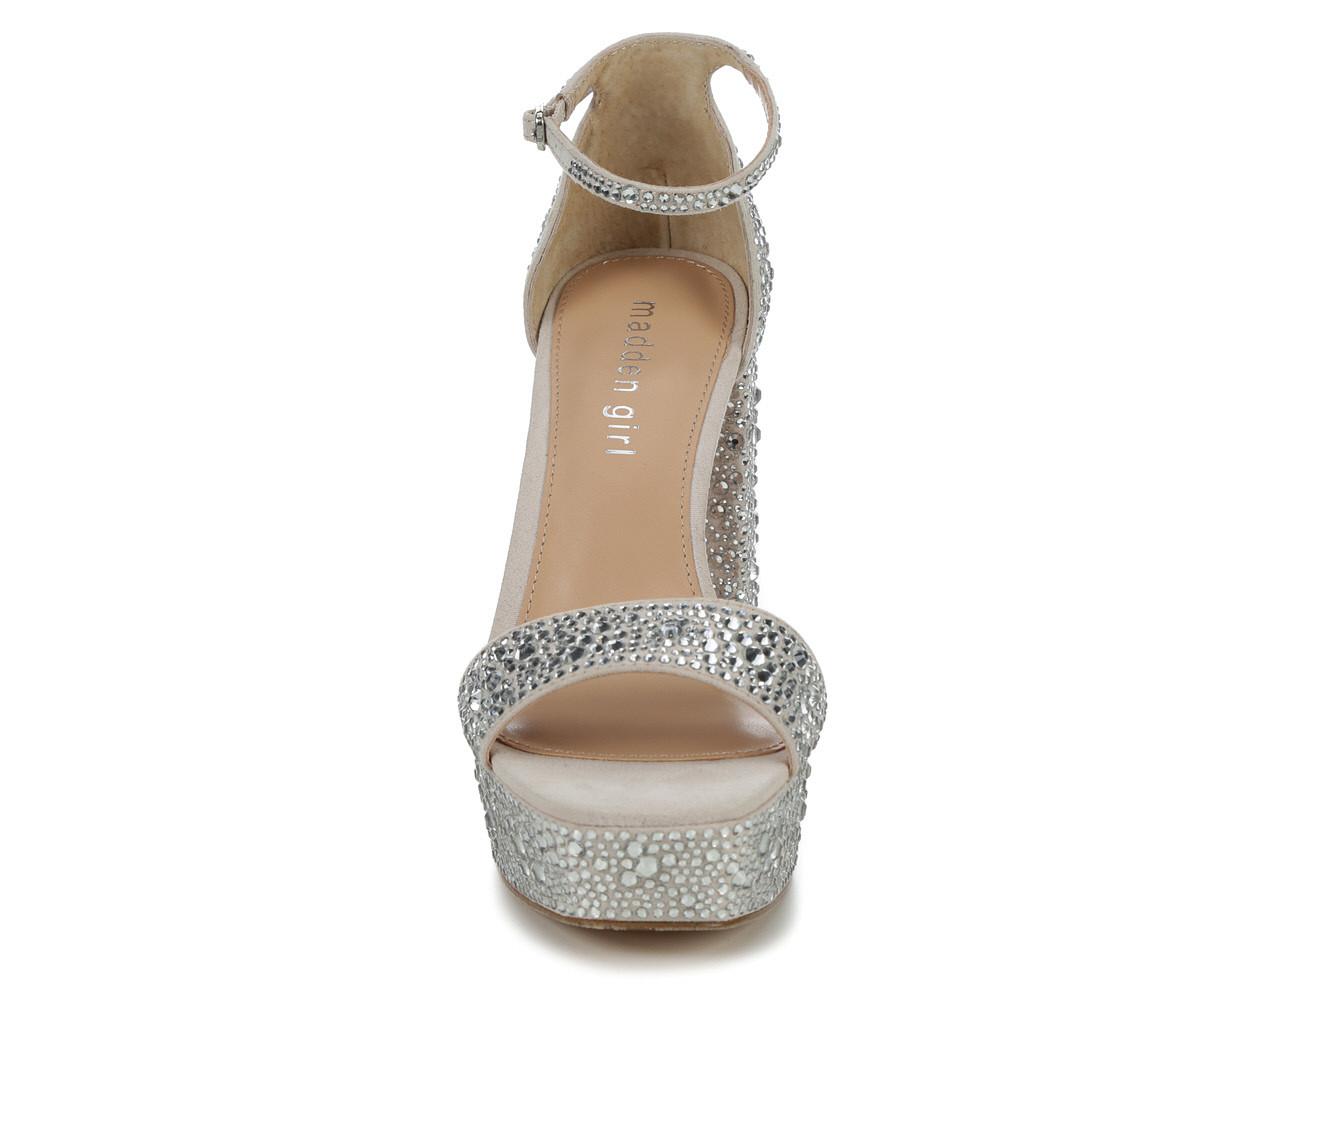 Women's Madden Girl Omega Rhinestone Platform Special Occasion Shoes